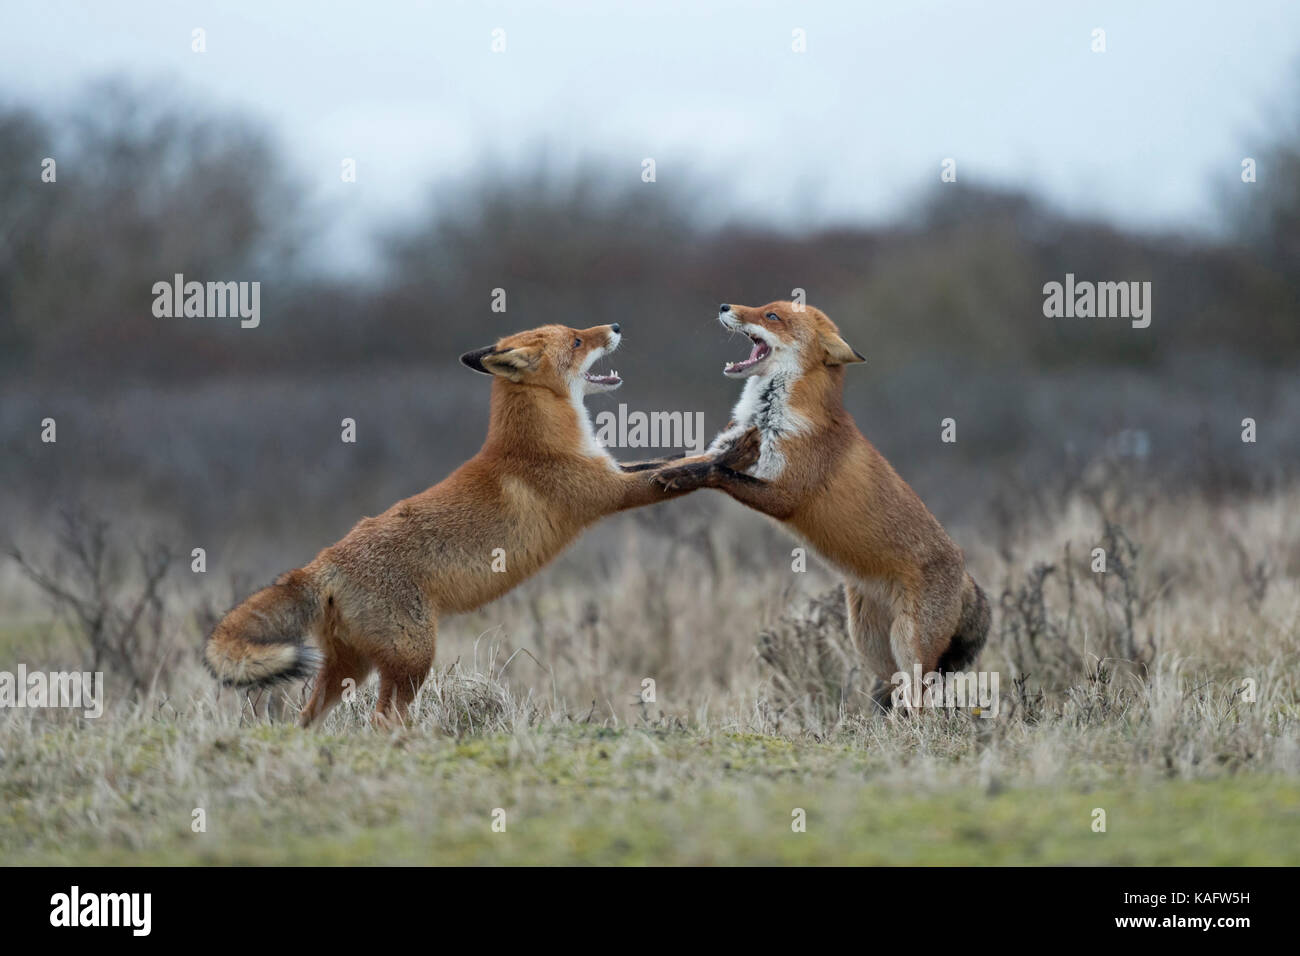 Red Foxes / Rotfuechse ( Vulpes vulpes ) in fight, fighting, standing on hind legs, threatening with wide open jaws, while rutting season. Stock Photo